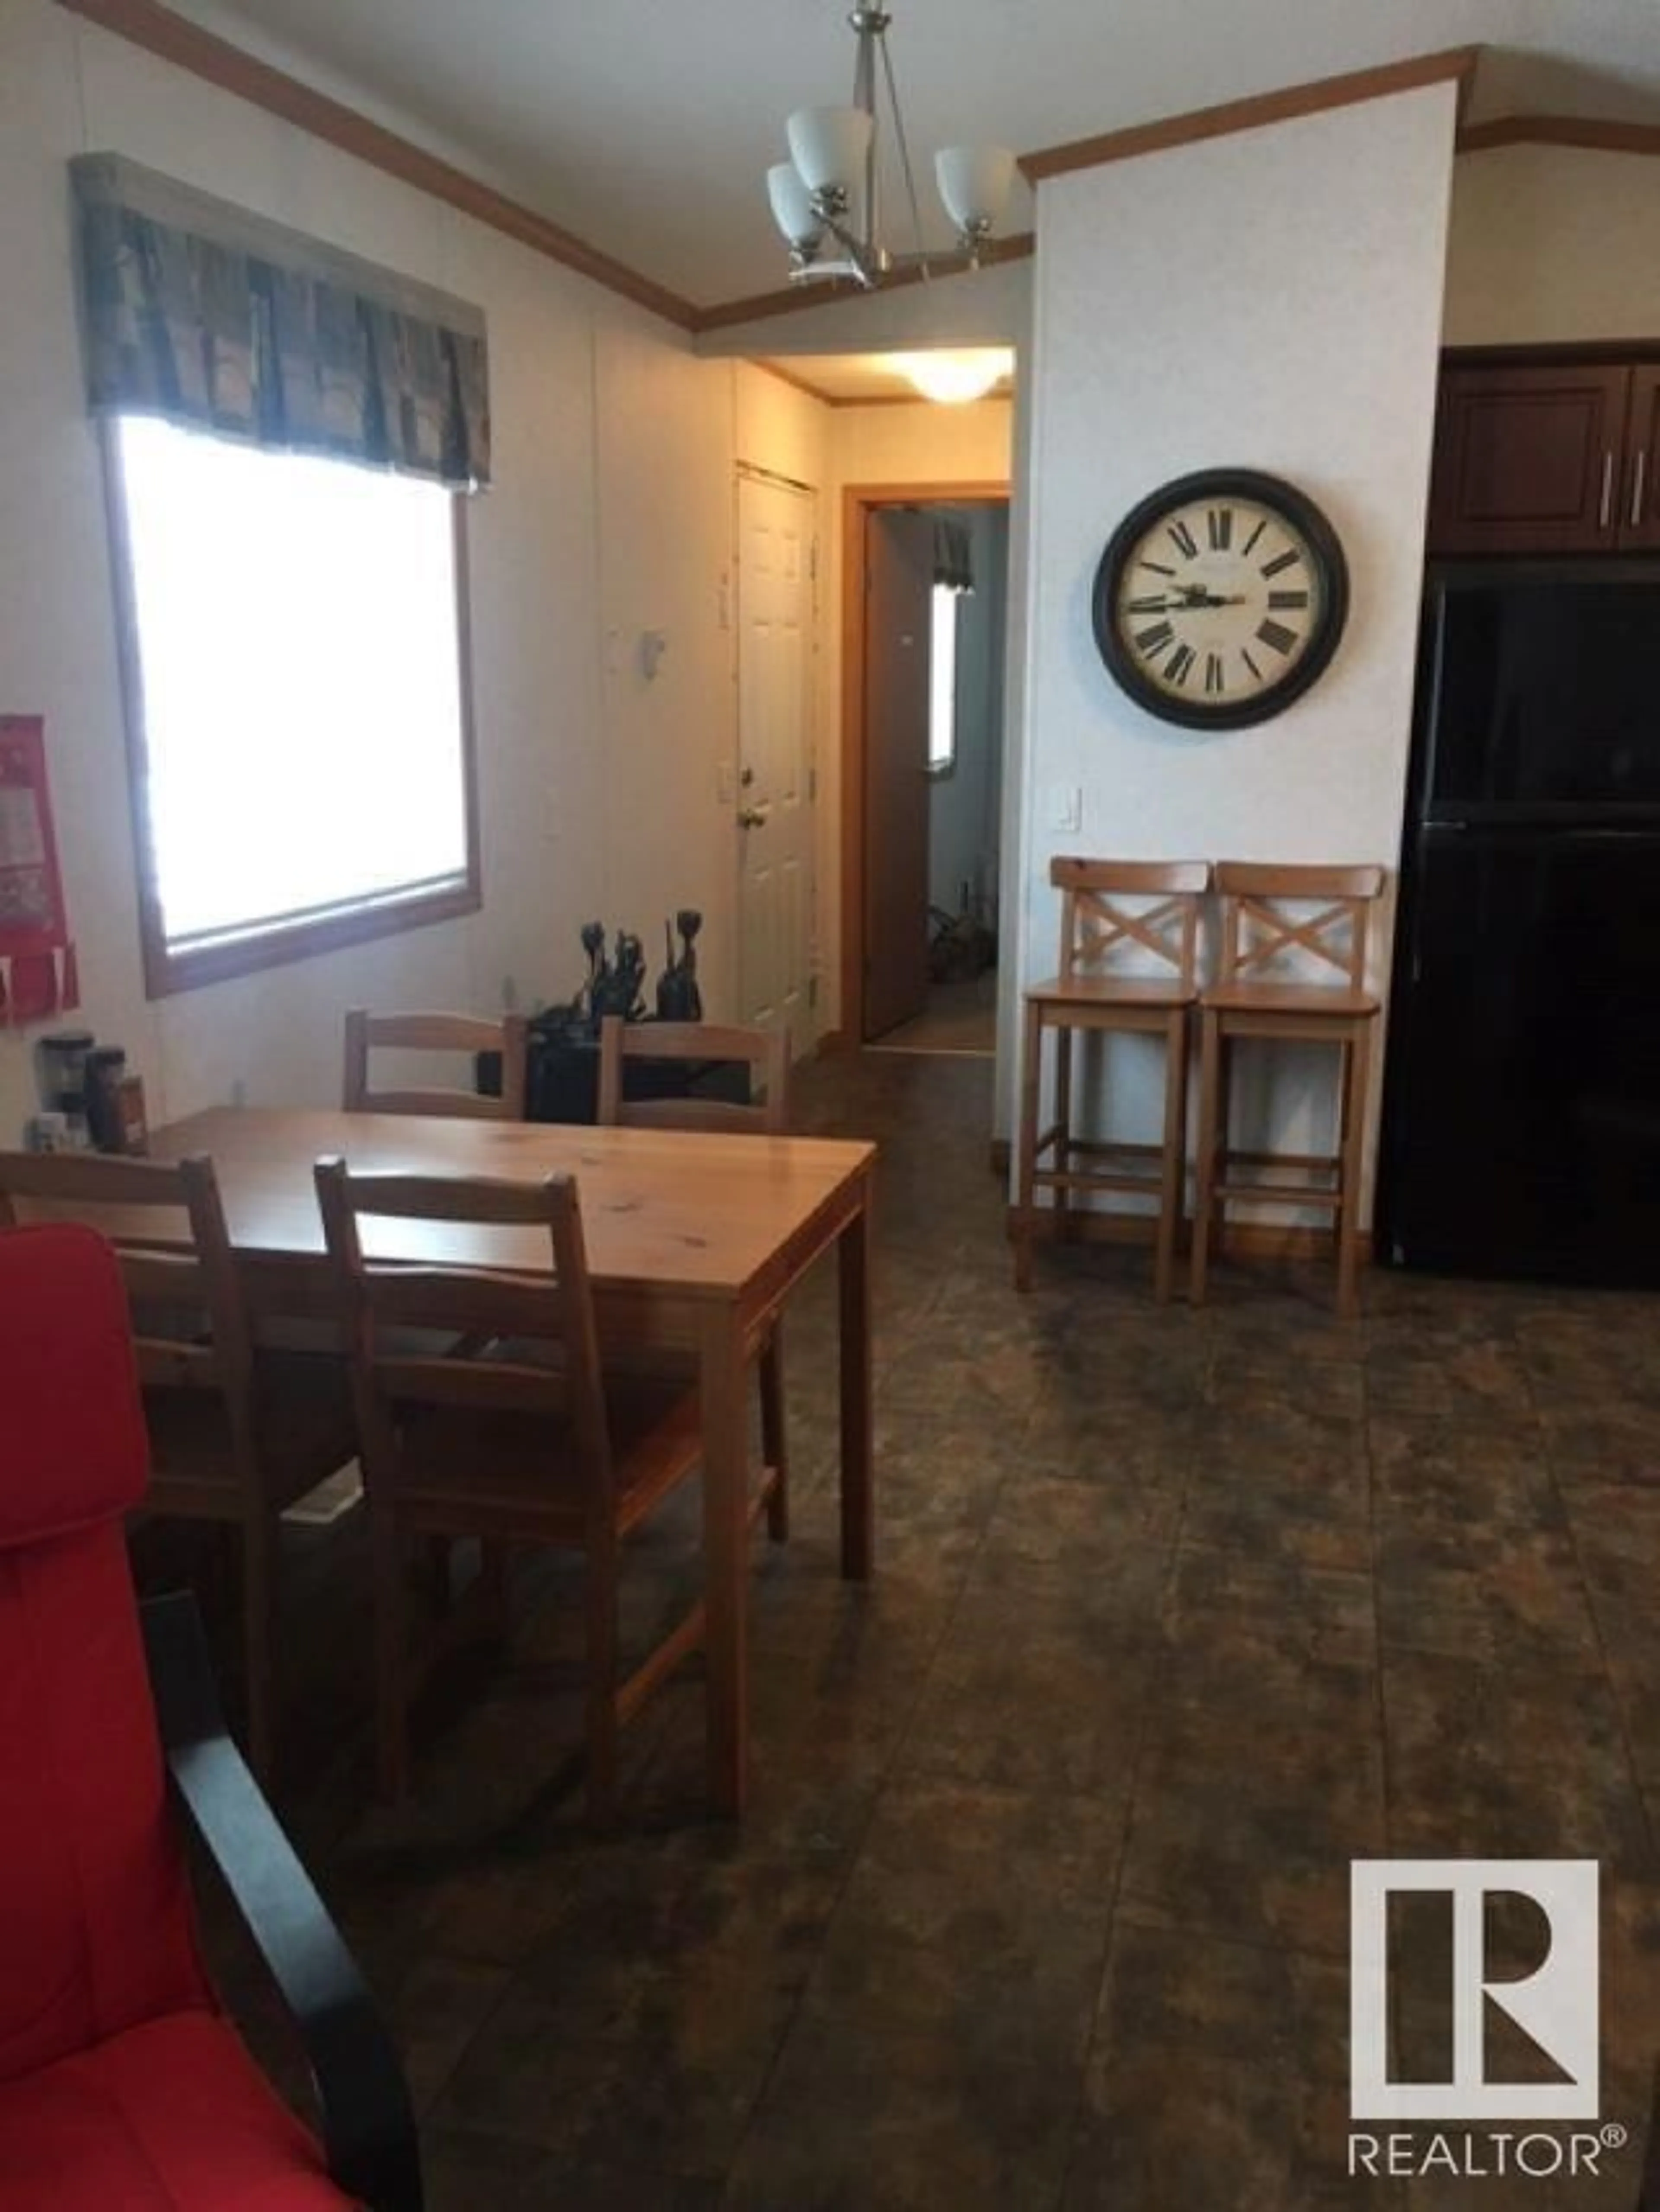 Dining room for 174 Pine LN, Conklin Alberta T0P1H1